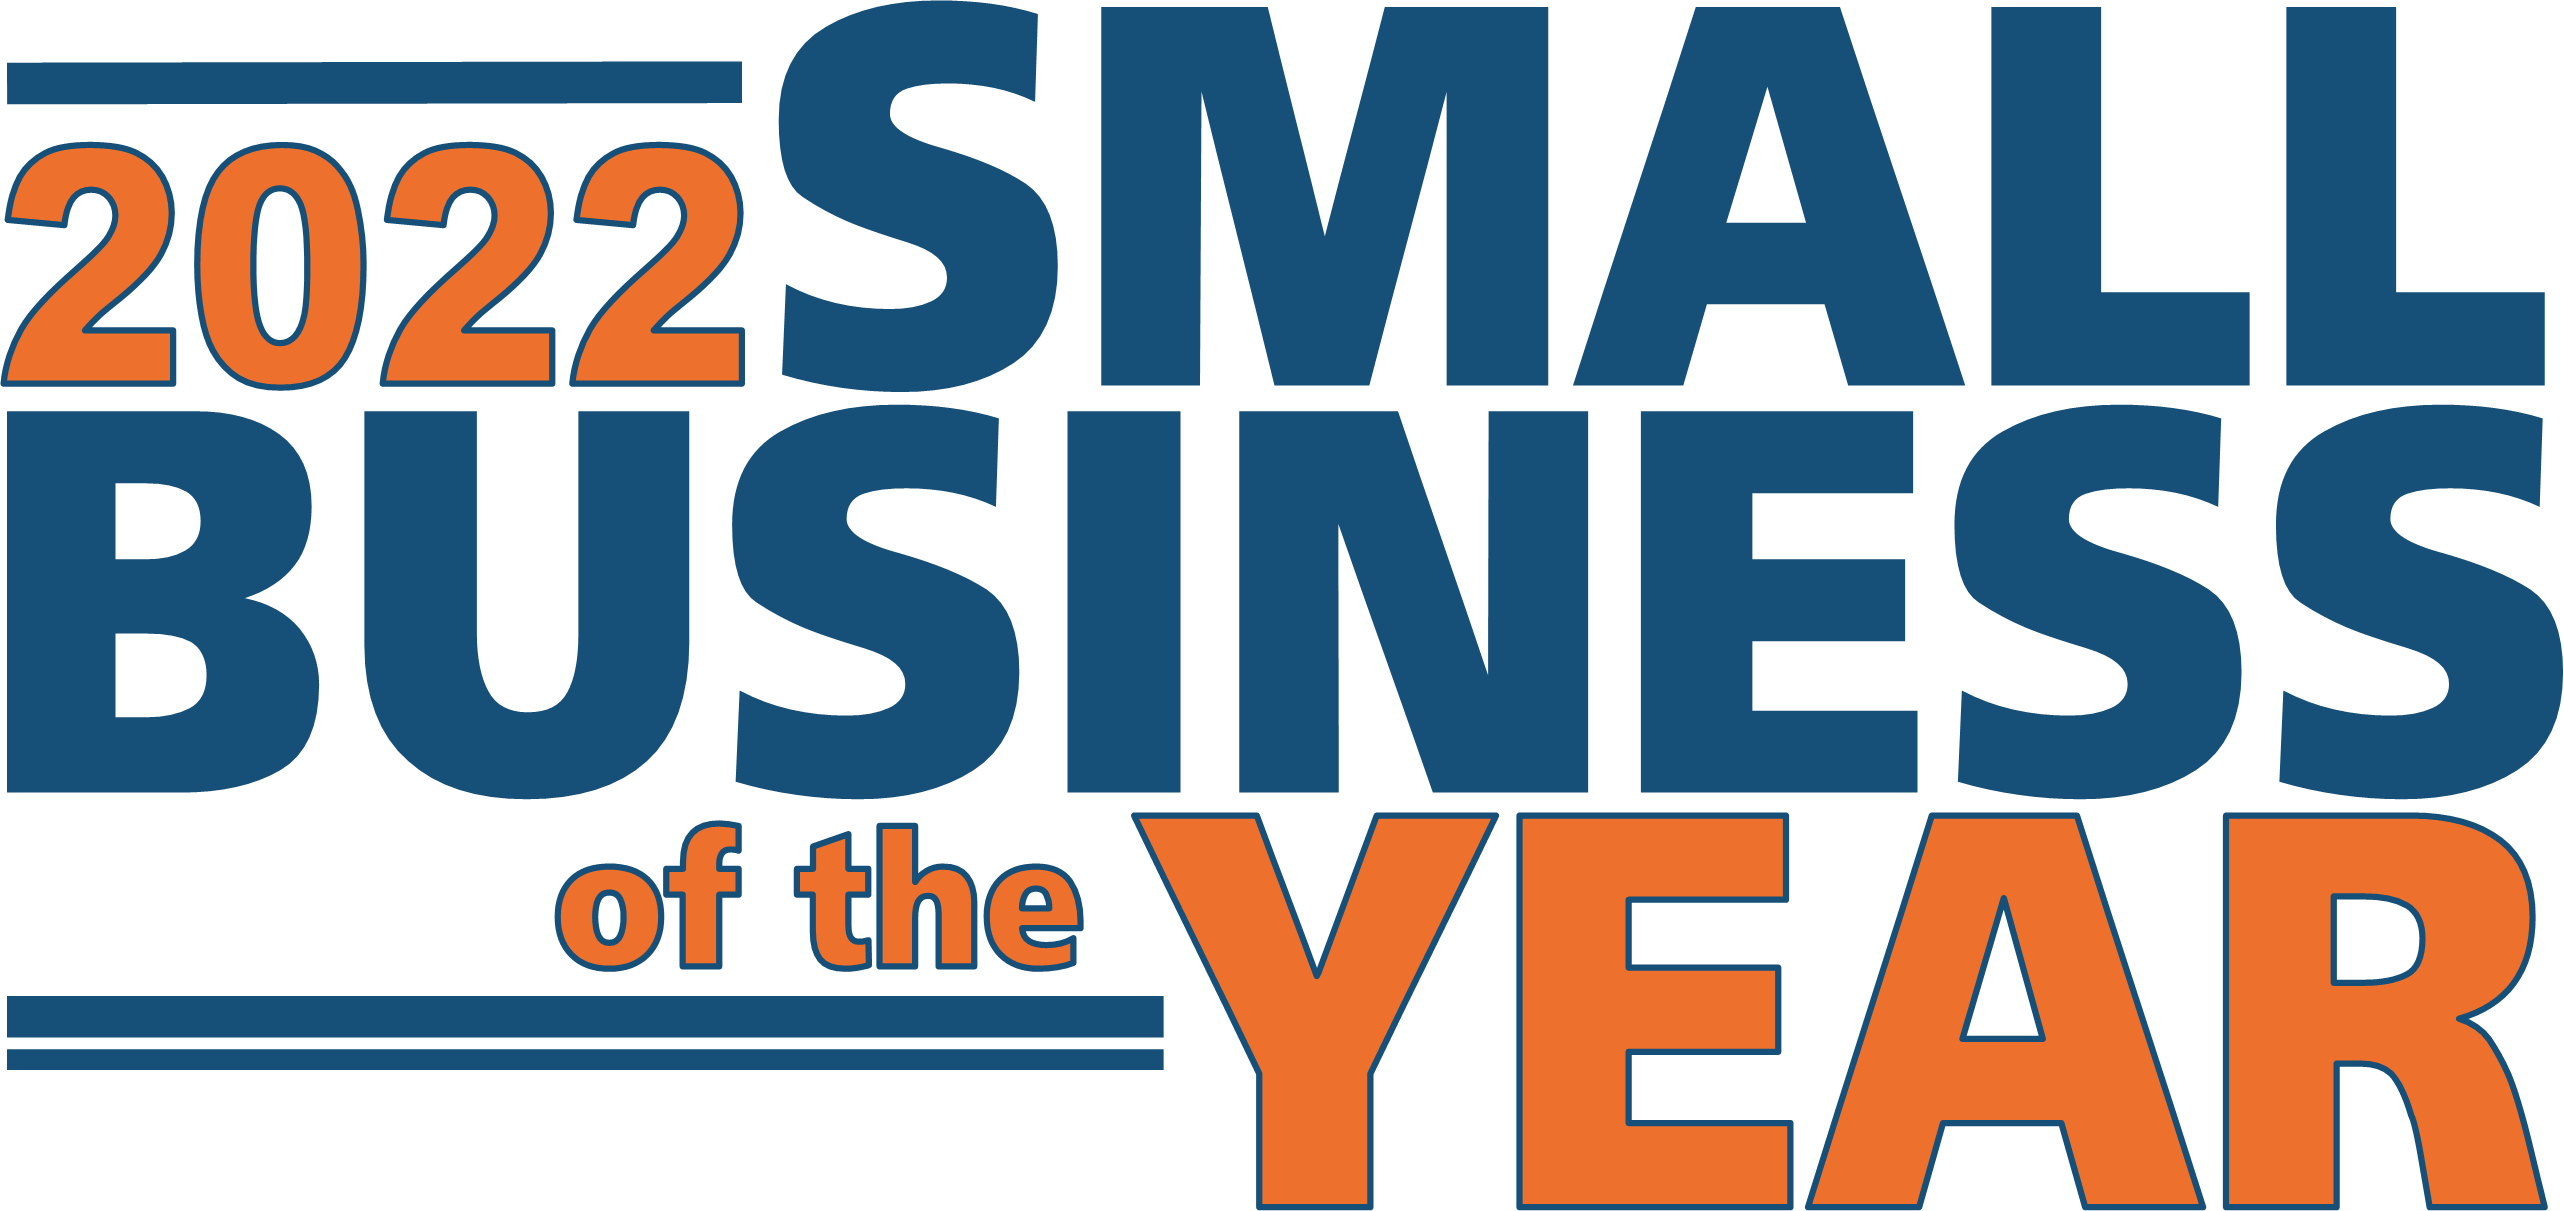 Image for 2022 Small Business of the Year - Nominations Now Being Accepted